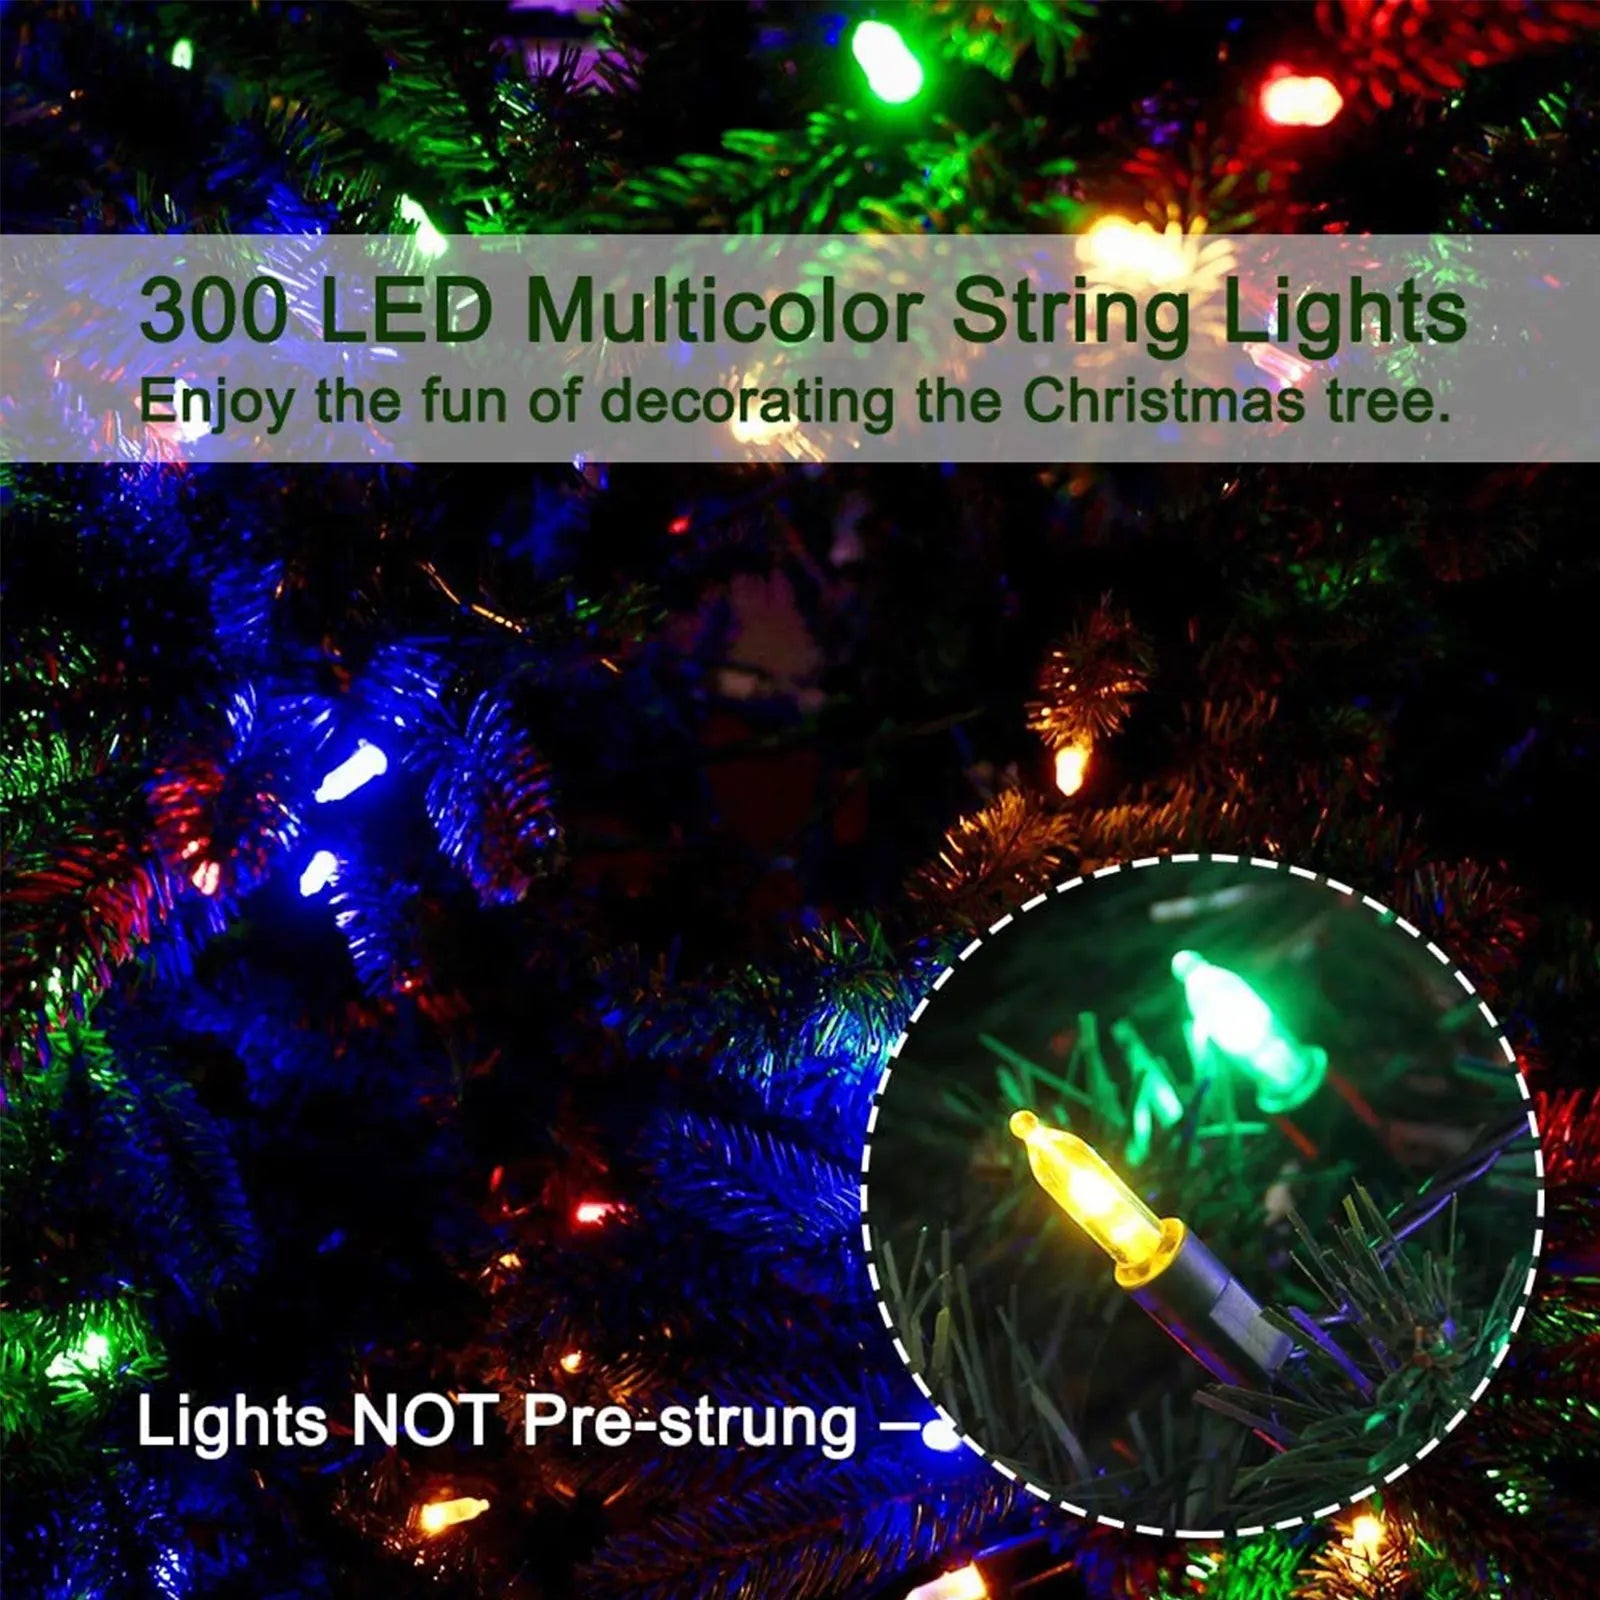 6 or 7.5 ft Artificial Christmas Tree with 300 LED Multicolor String Lights